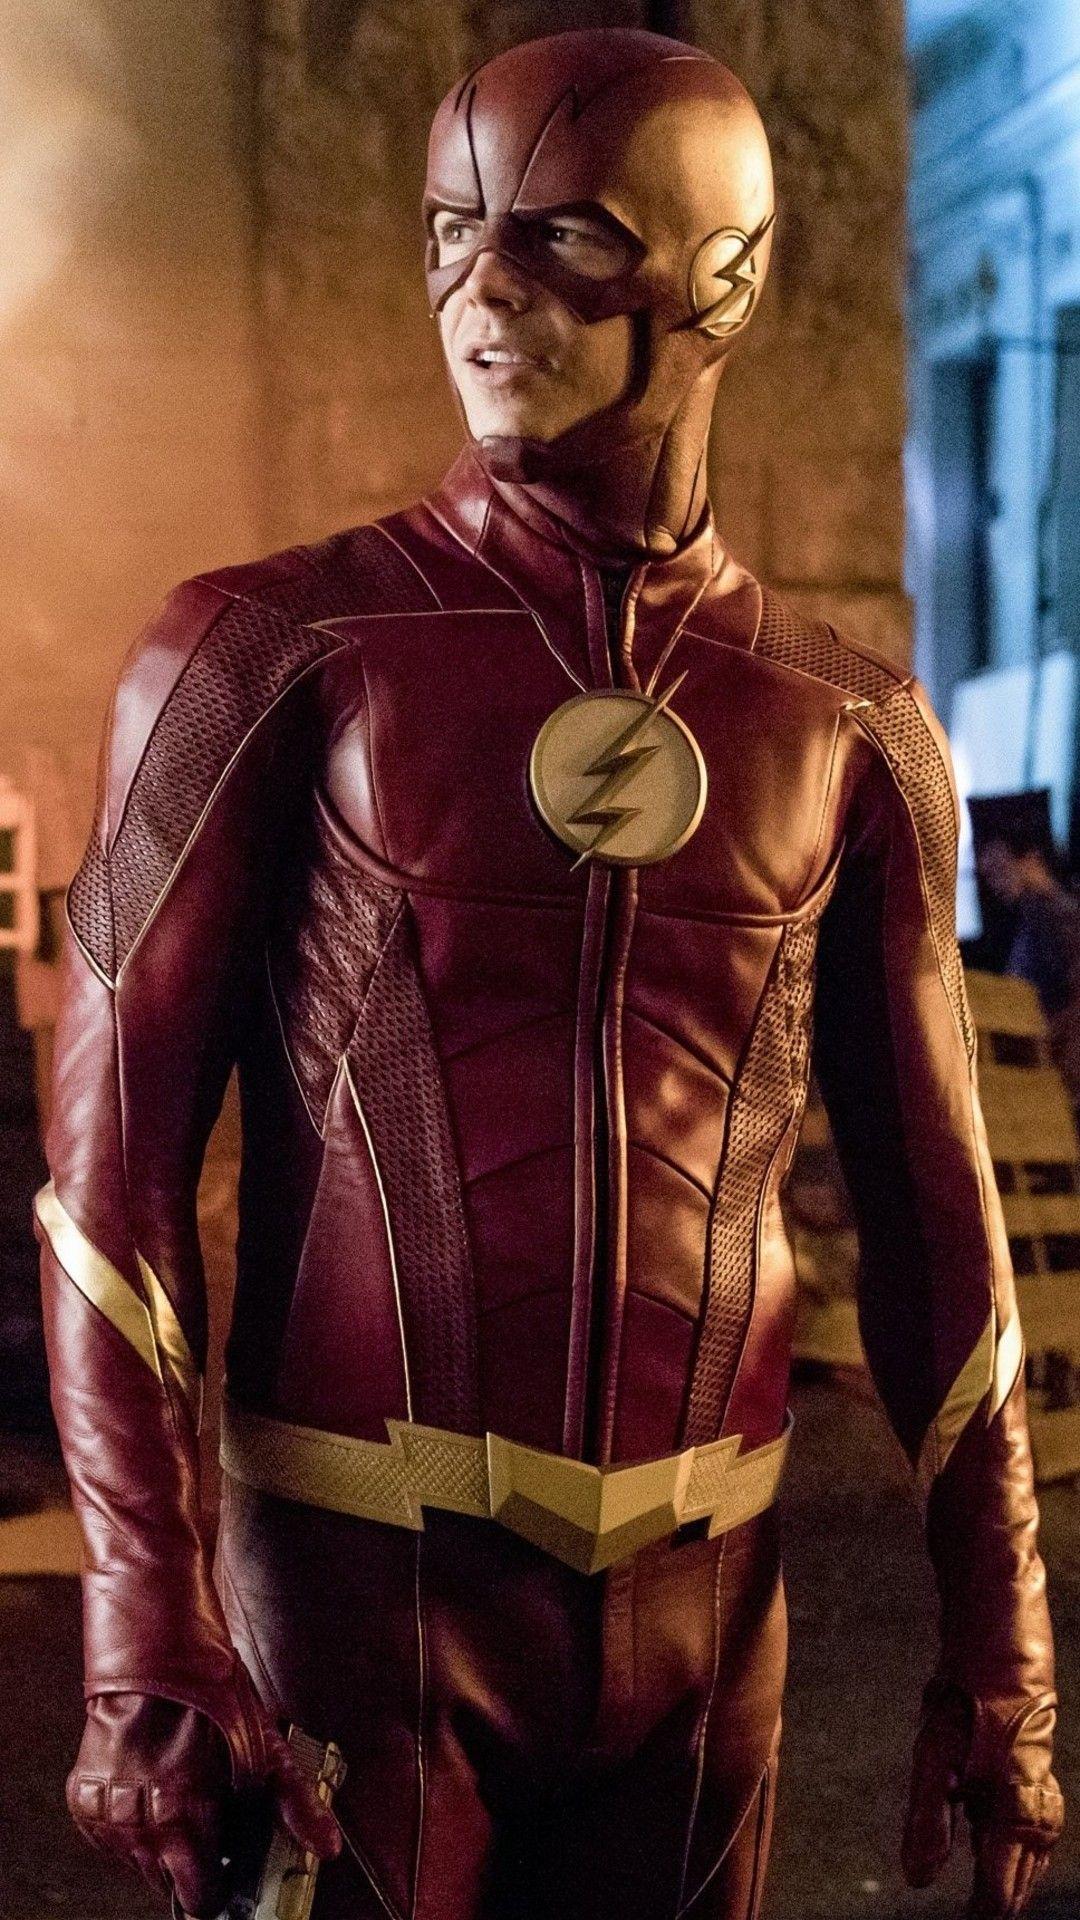 Barry Allen As Flash In The Flash Season 4 2017 iPhone 7